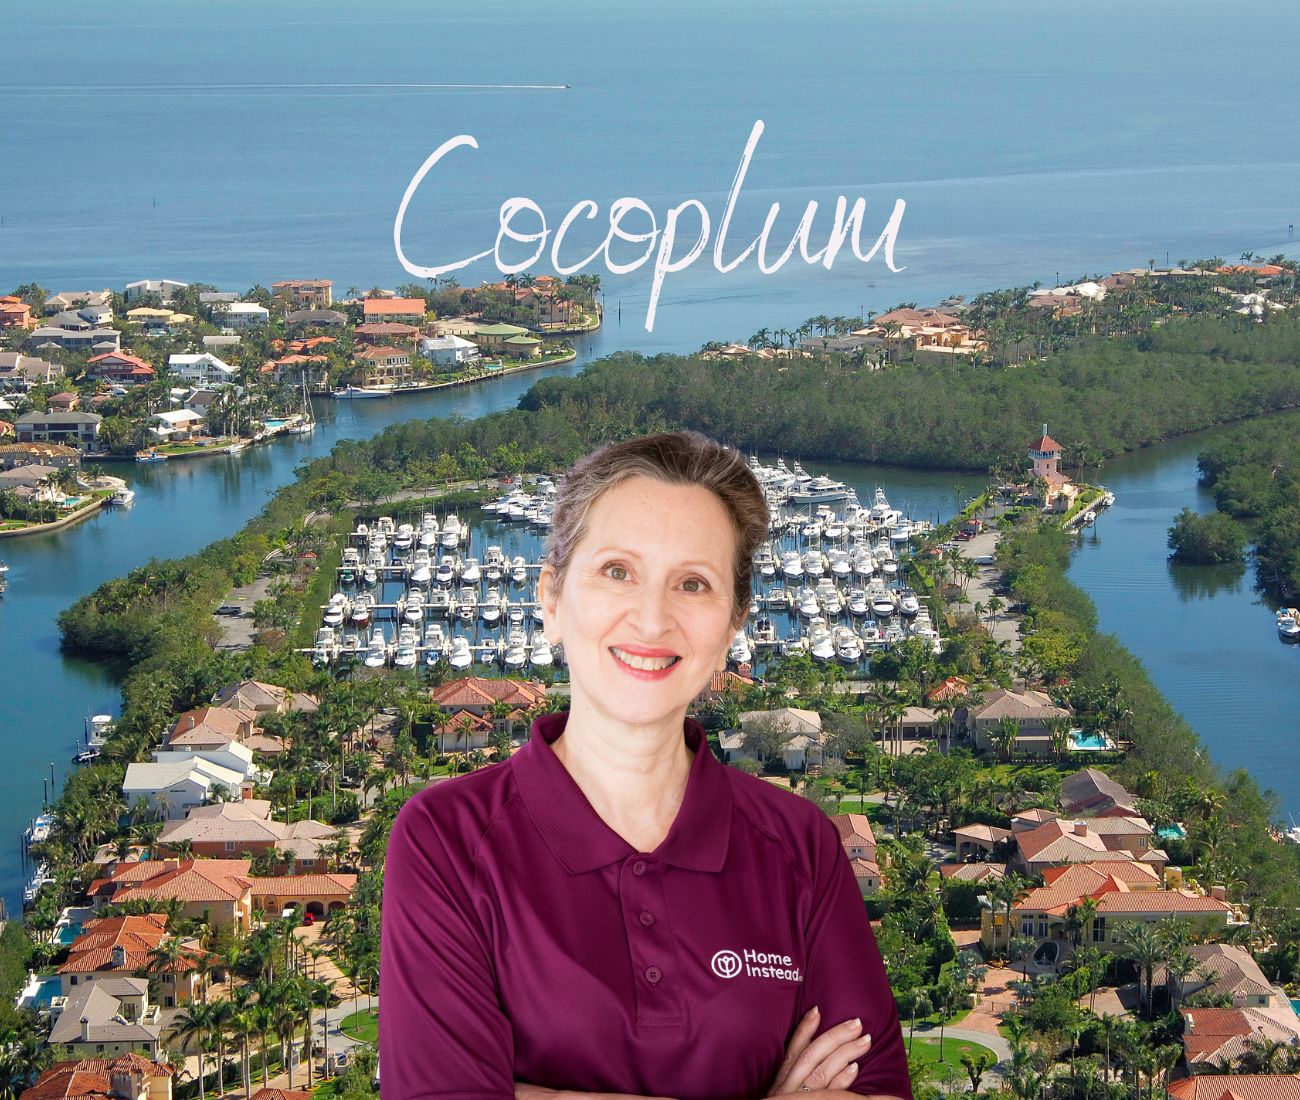 Home Instead caregiver with Cocoplum, FL in the background